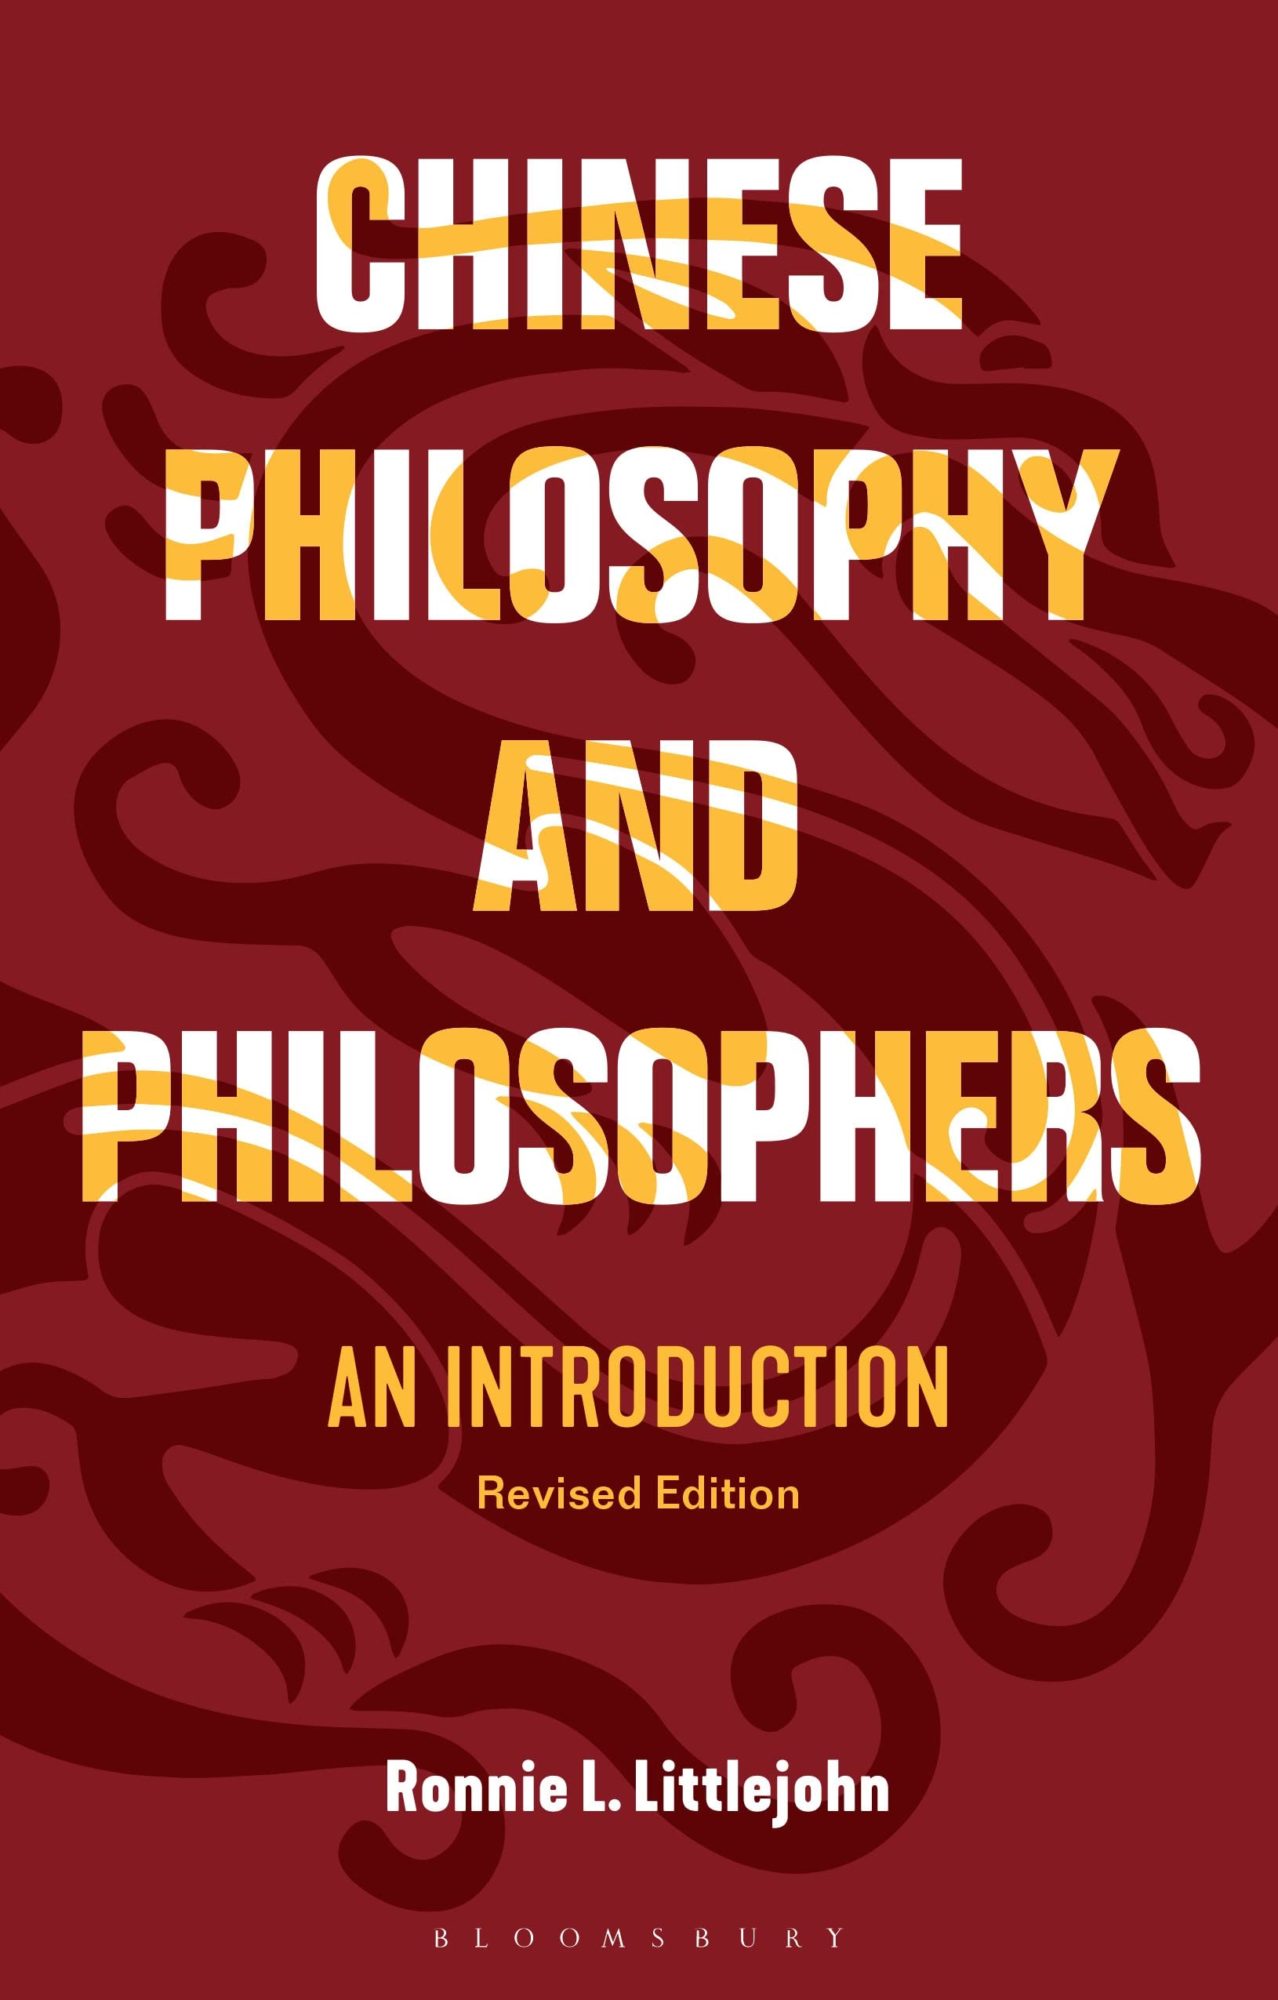 CHinese Philosophy and Philosophers